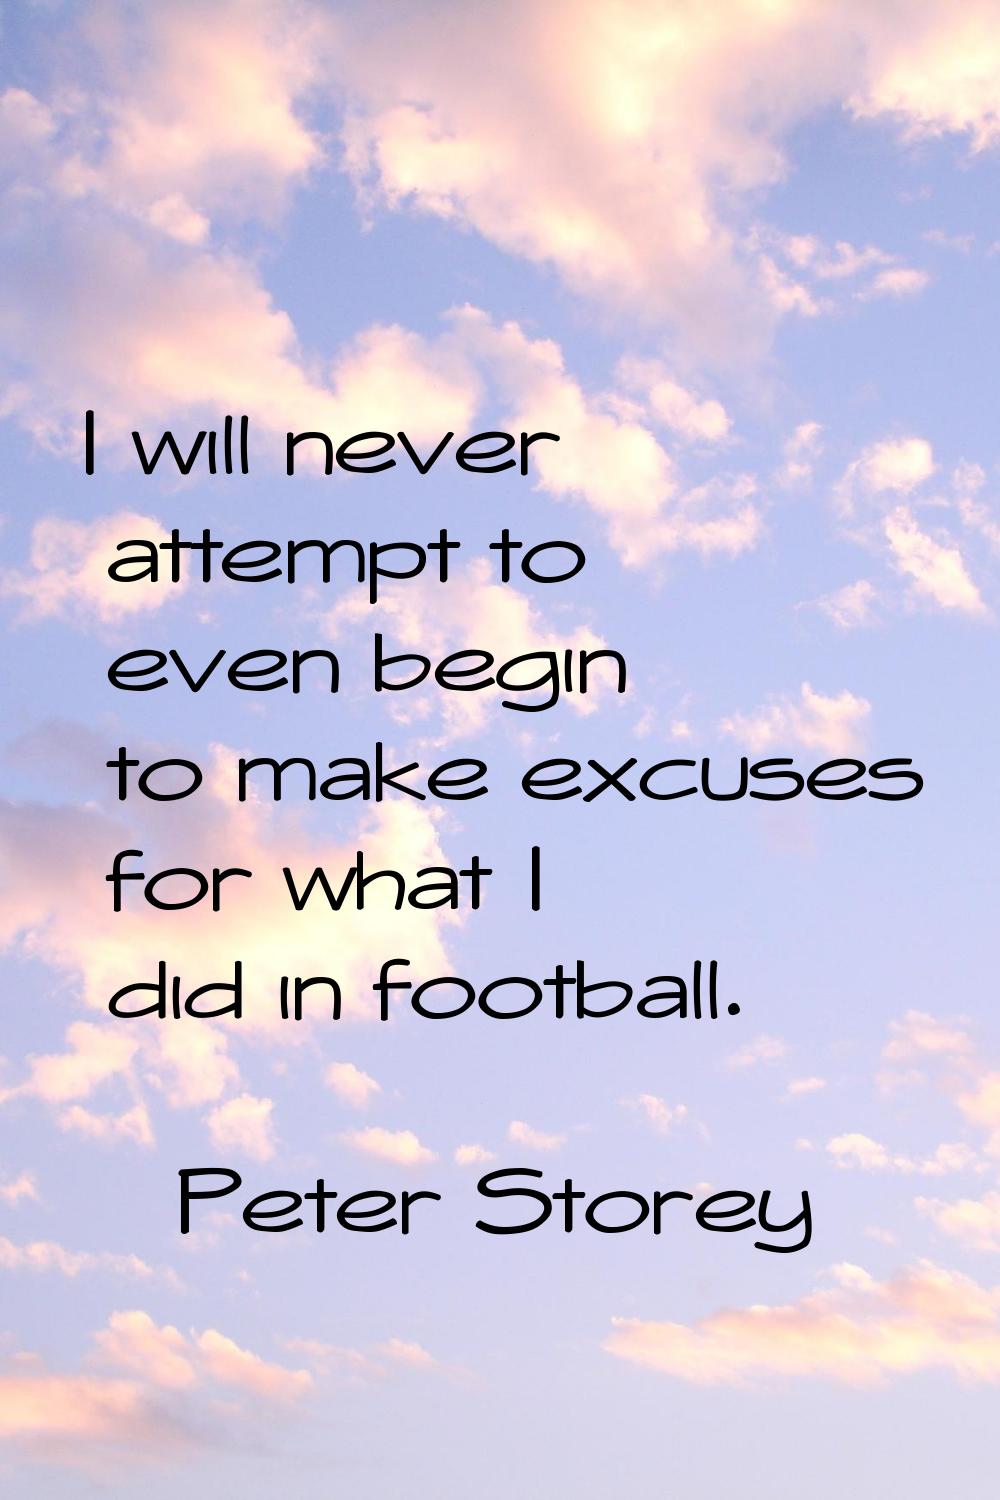 I will never attempt to even begin to make excuses for what I did in football.